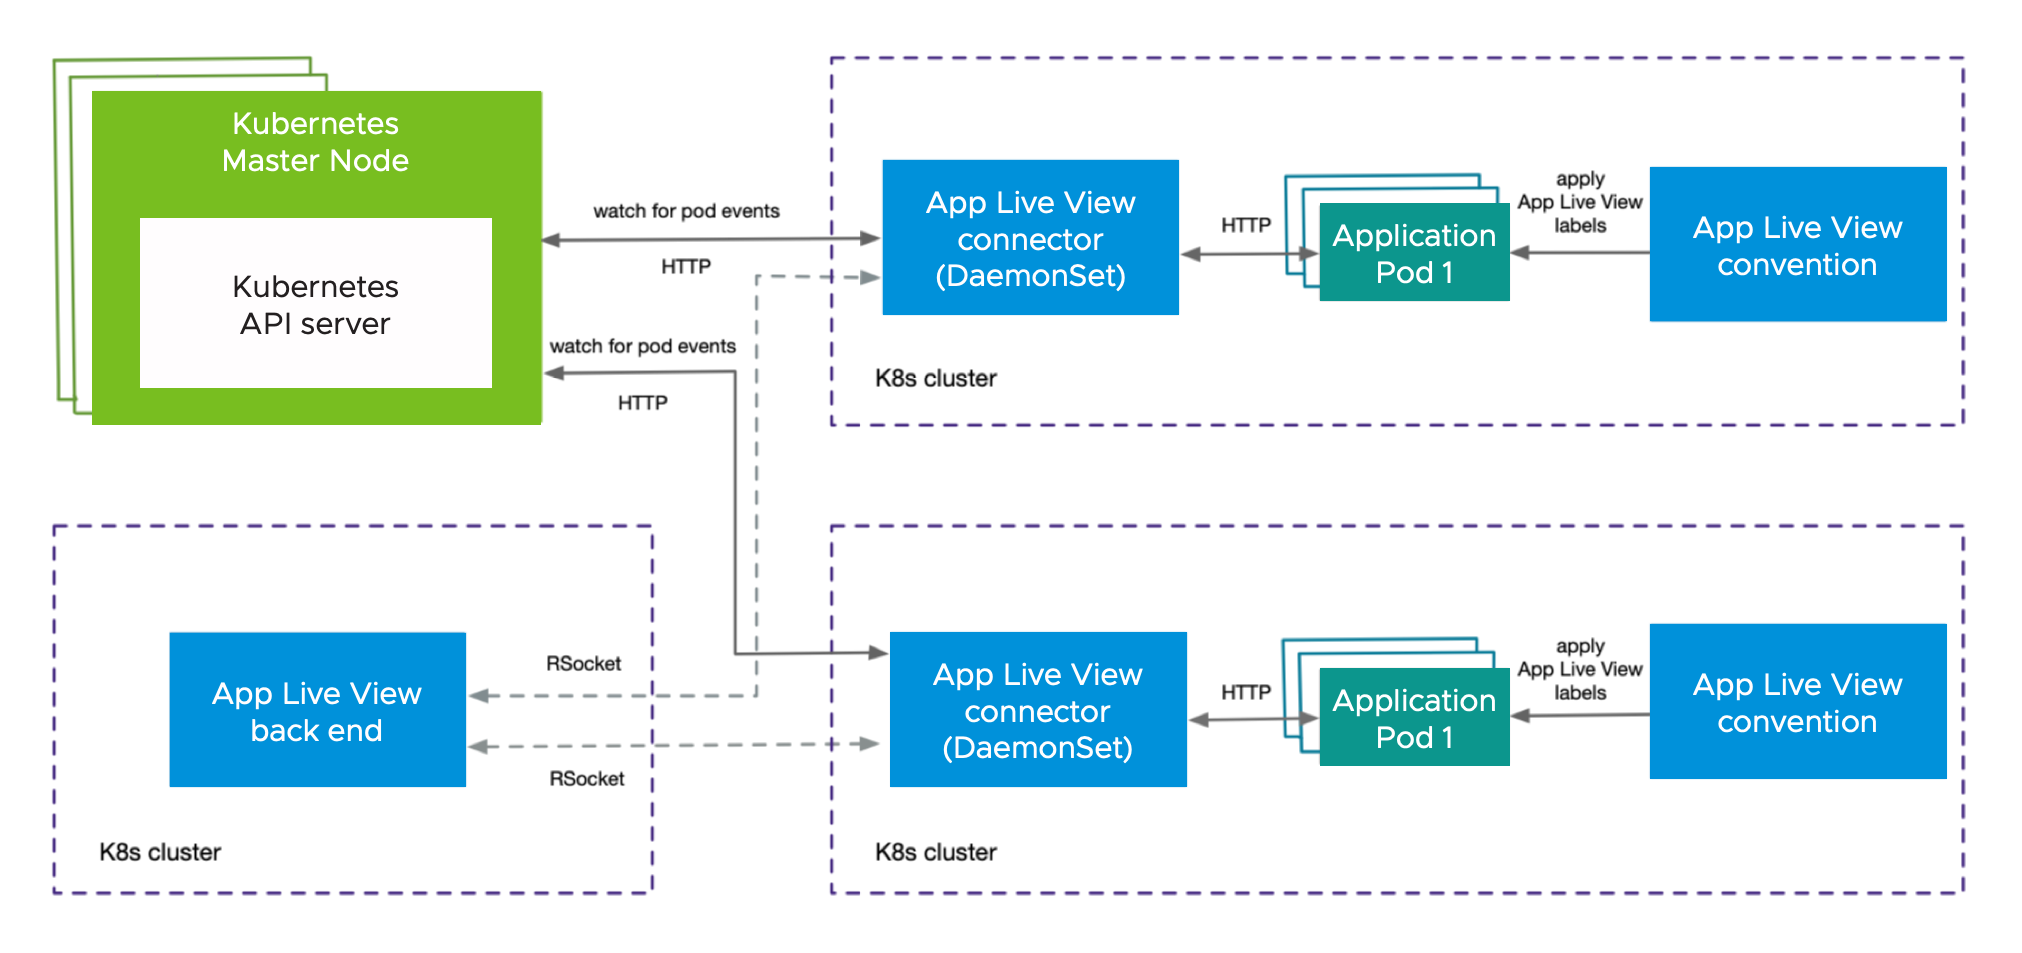 Diagram showing the Application Live View architecture. Continue reading this topic for an extended description of this diagram.